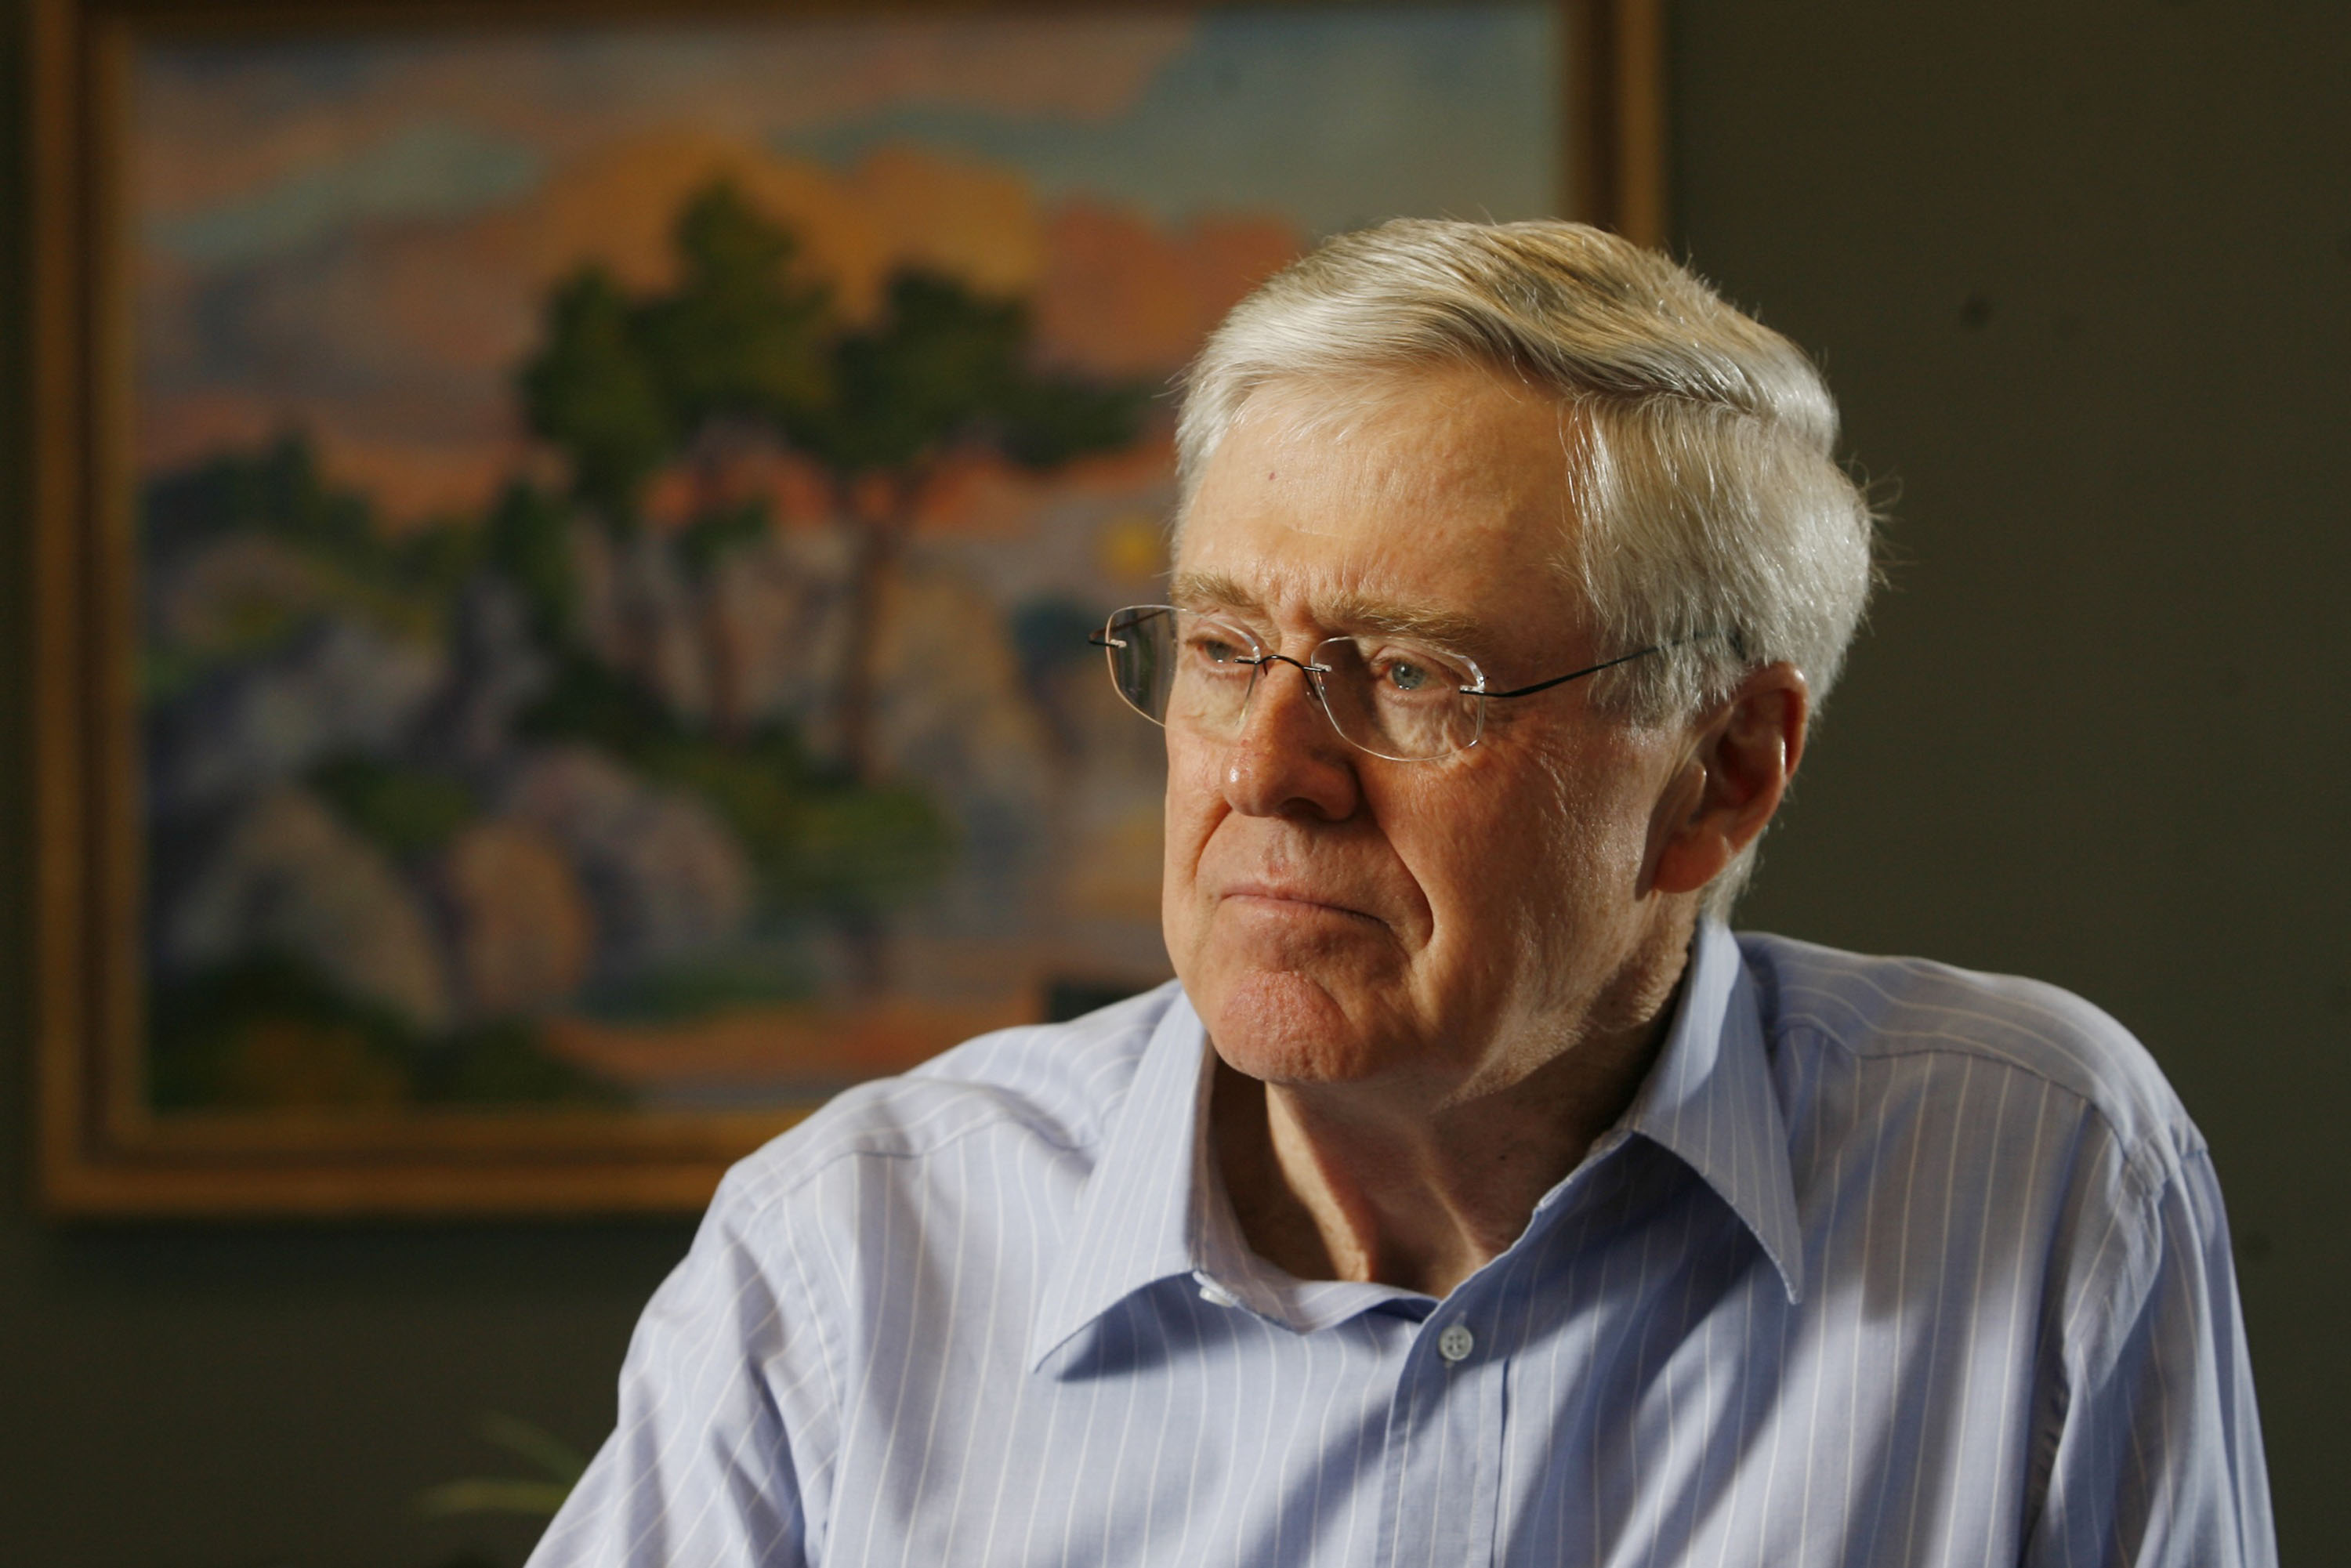 In this February 26, 2007 file photograph, Charles Koch, head of Koch Industries, talks passionately about his new book on Market Based Management. (Wichita Eagle—MCT via Getty Images)